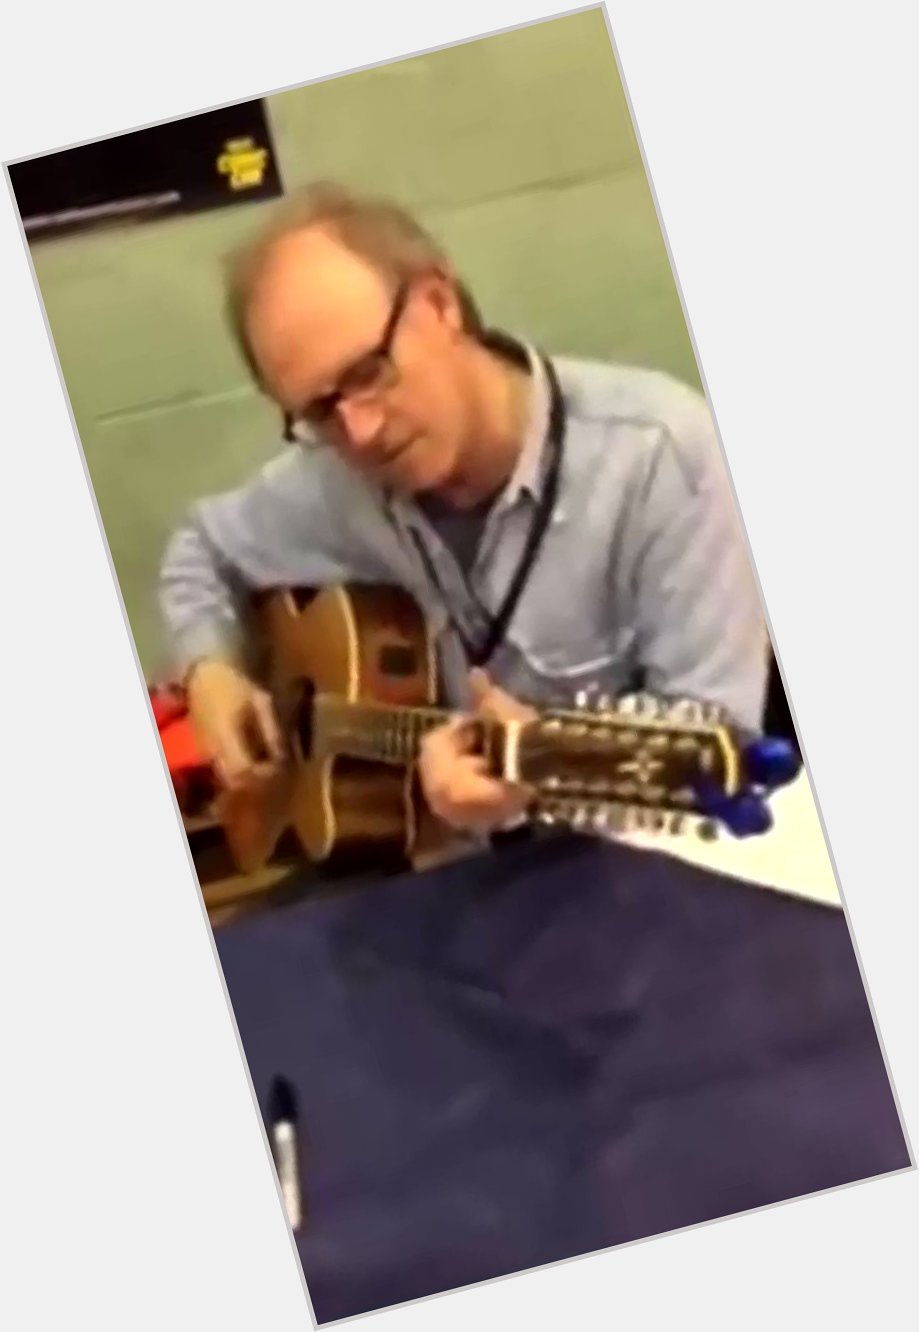 Happy birthday Peter Davison! here is a few moons ago playing my 12 string. 